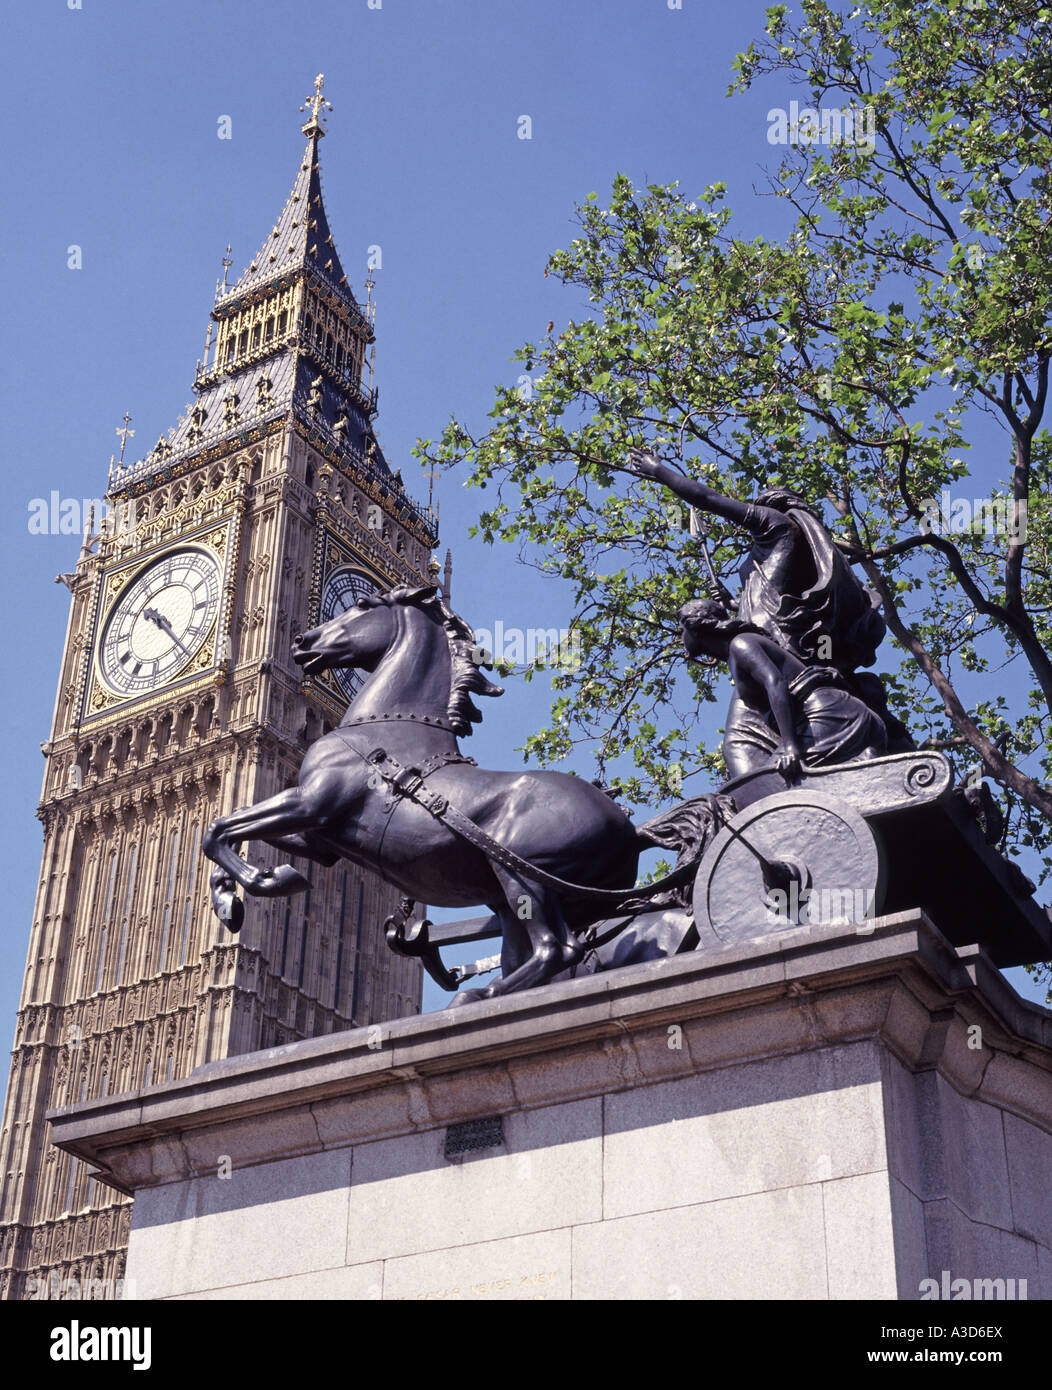 Big Ben iconic clock tower and Statue of Queen Boudica at the Houses of Parliament Stock Photo